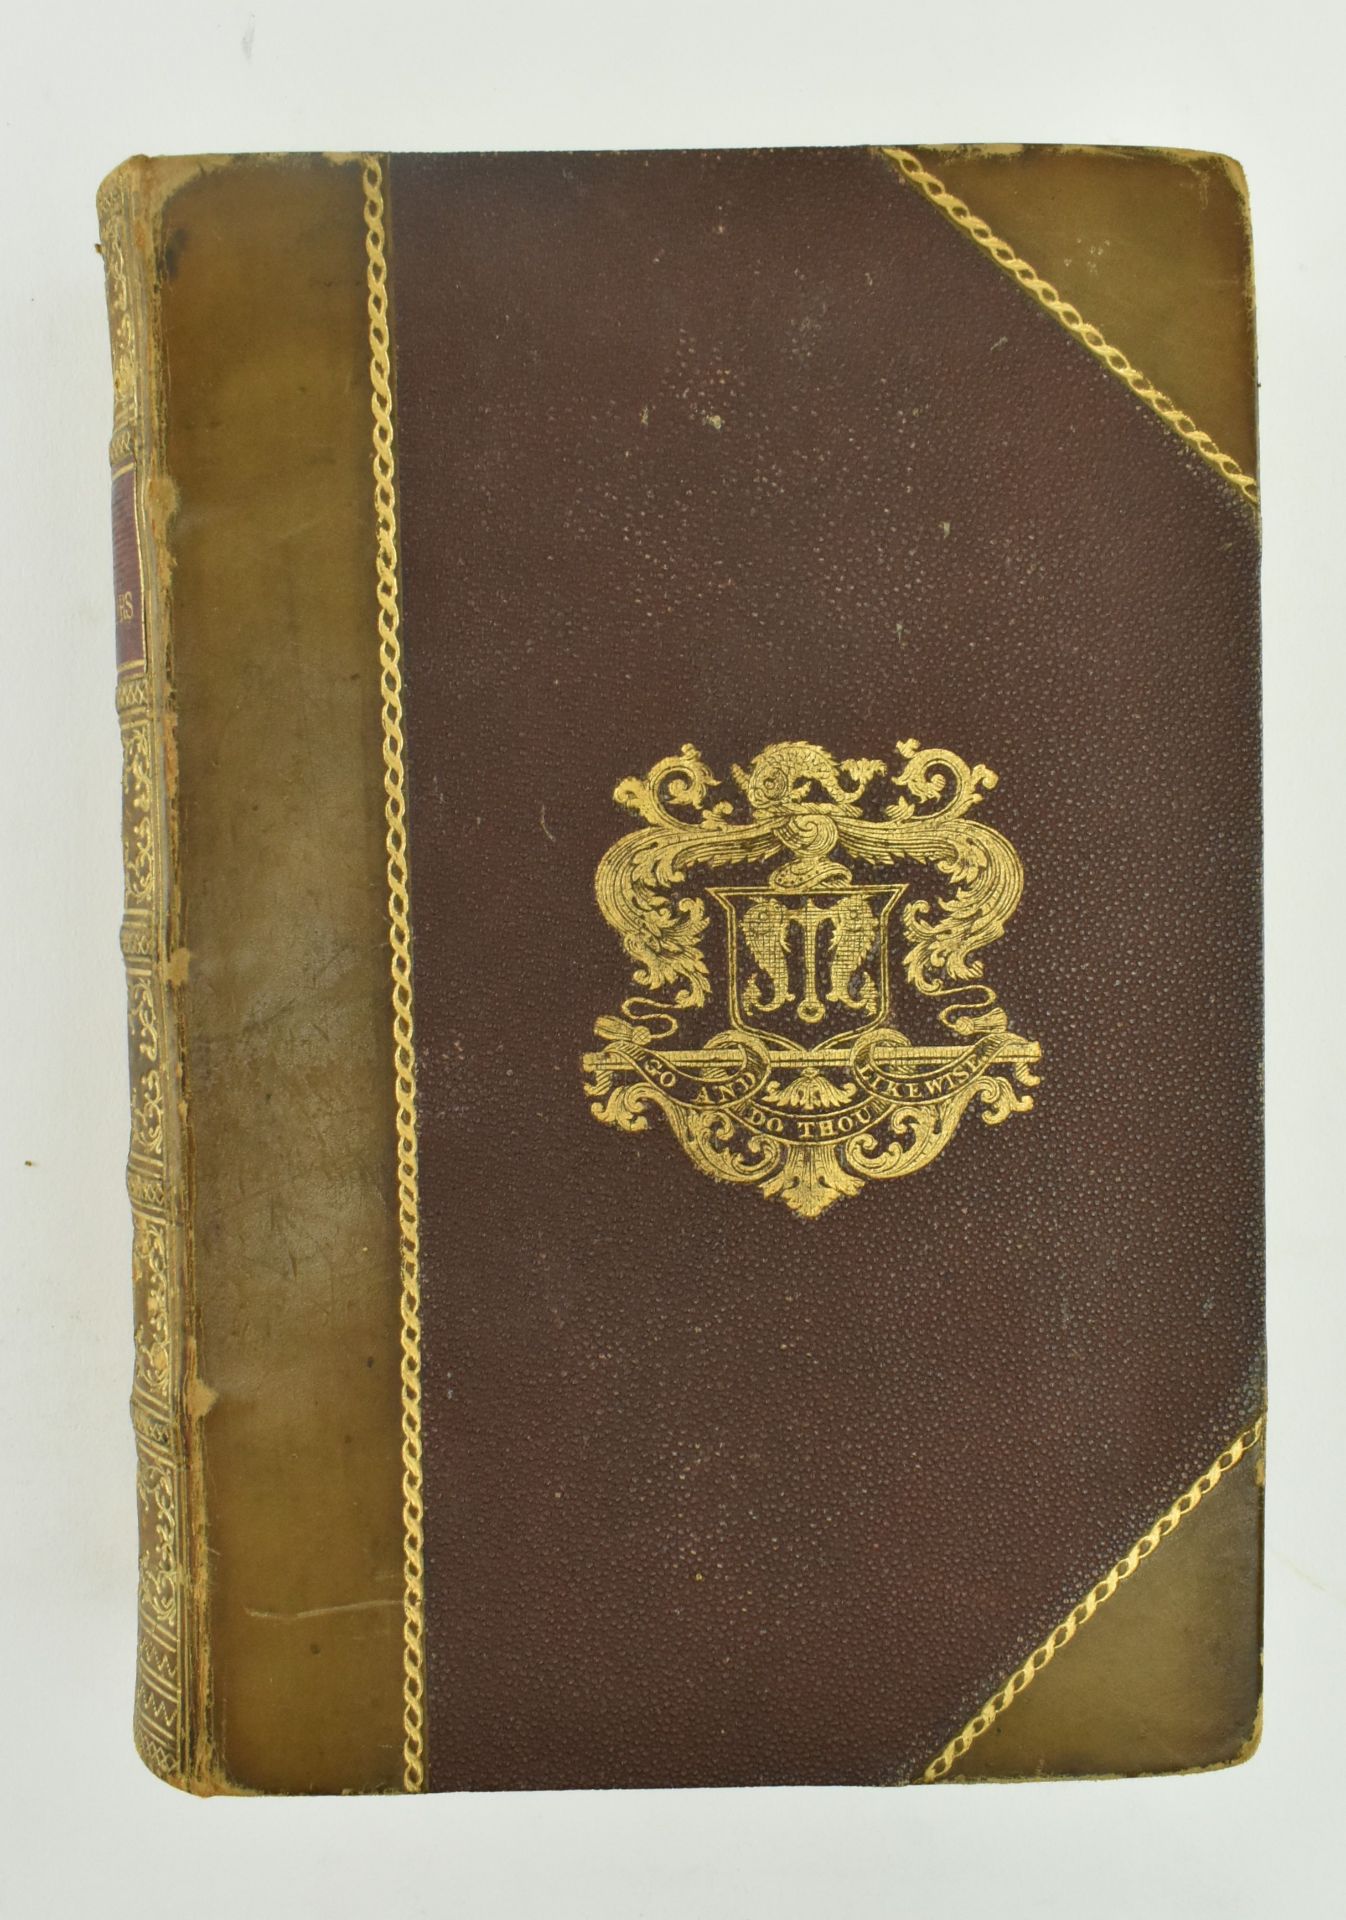 BINDINGS. COLLECTION OF VICTORIAN & LATER LEATHER BINDINGS - Image 8 of 9